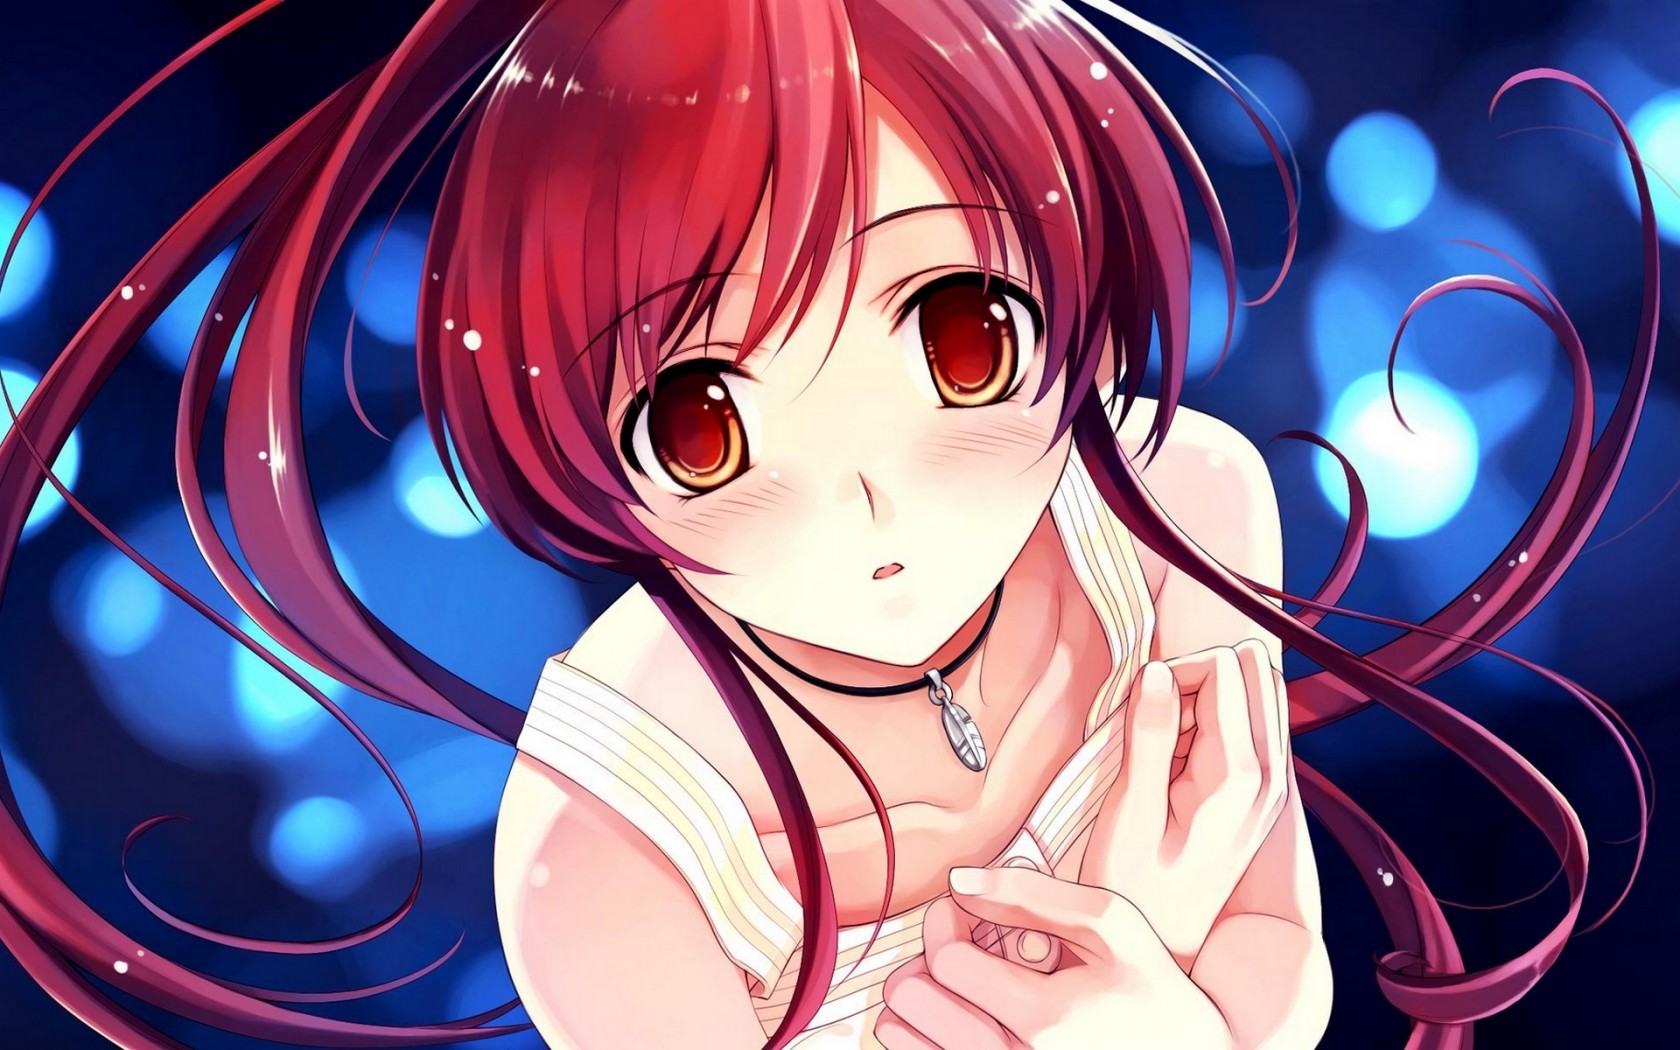 Anime Anime Girls Redhead Red Eyes Blushing Wallpapers Hd Desktop And Mobile Backgrounds